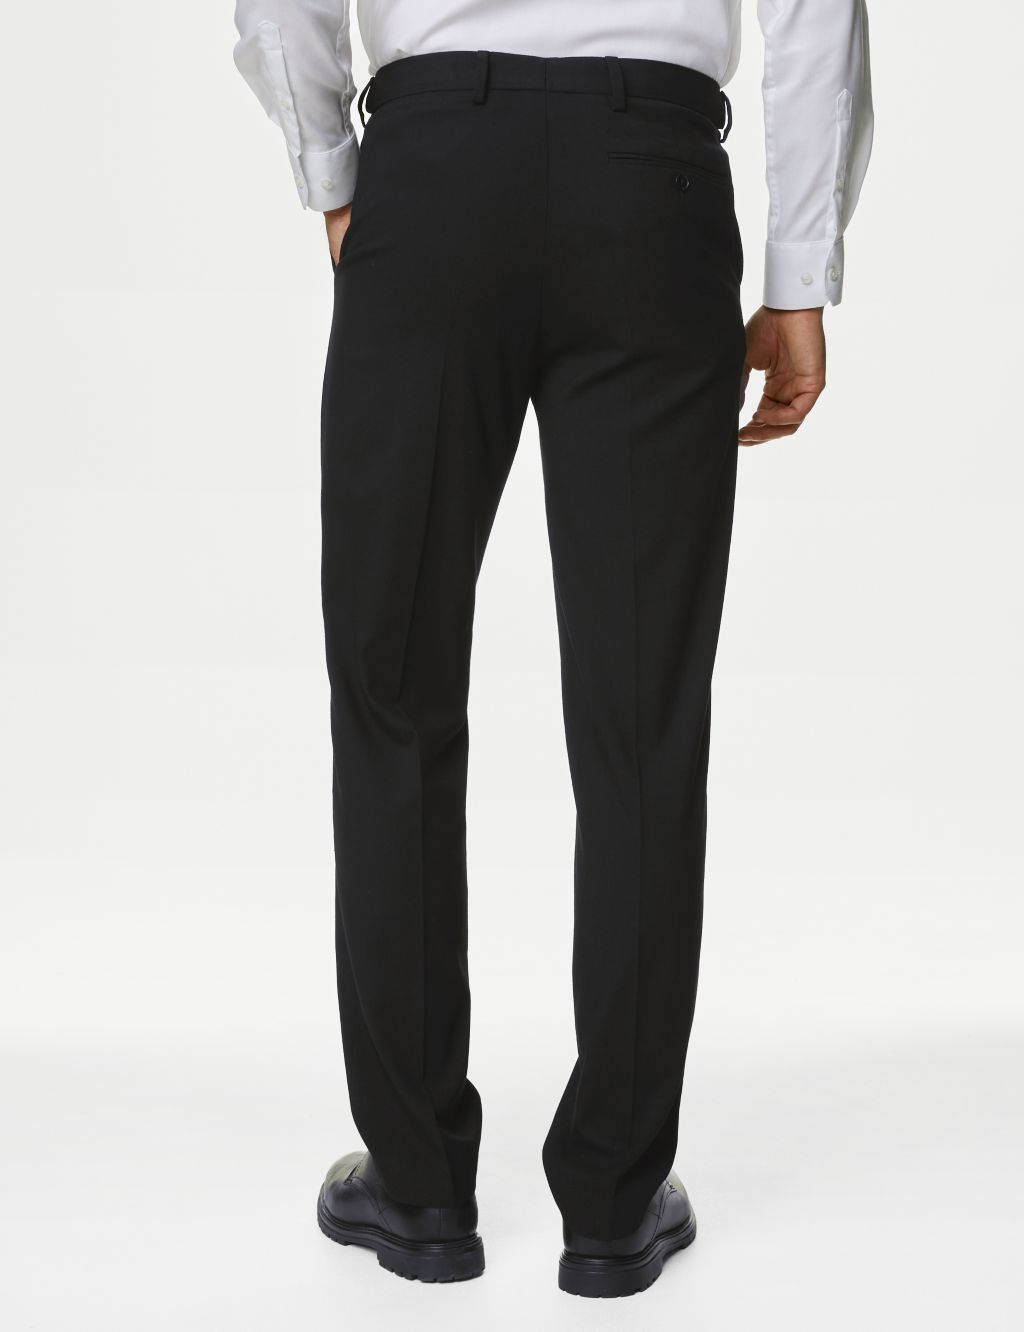 Regular Fit Stretch Trousers image 5